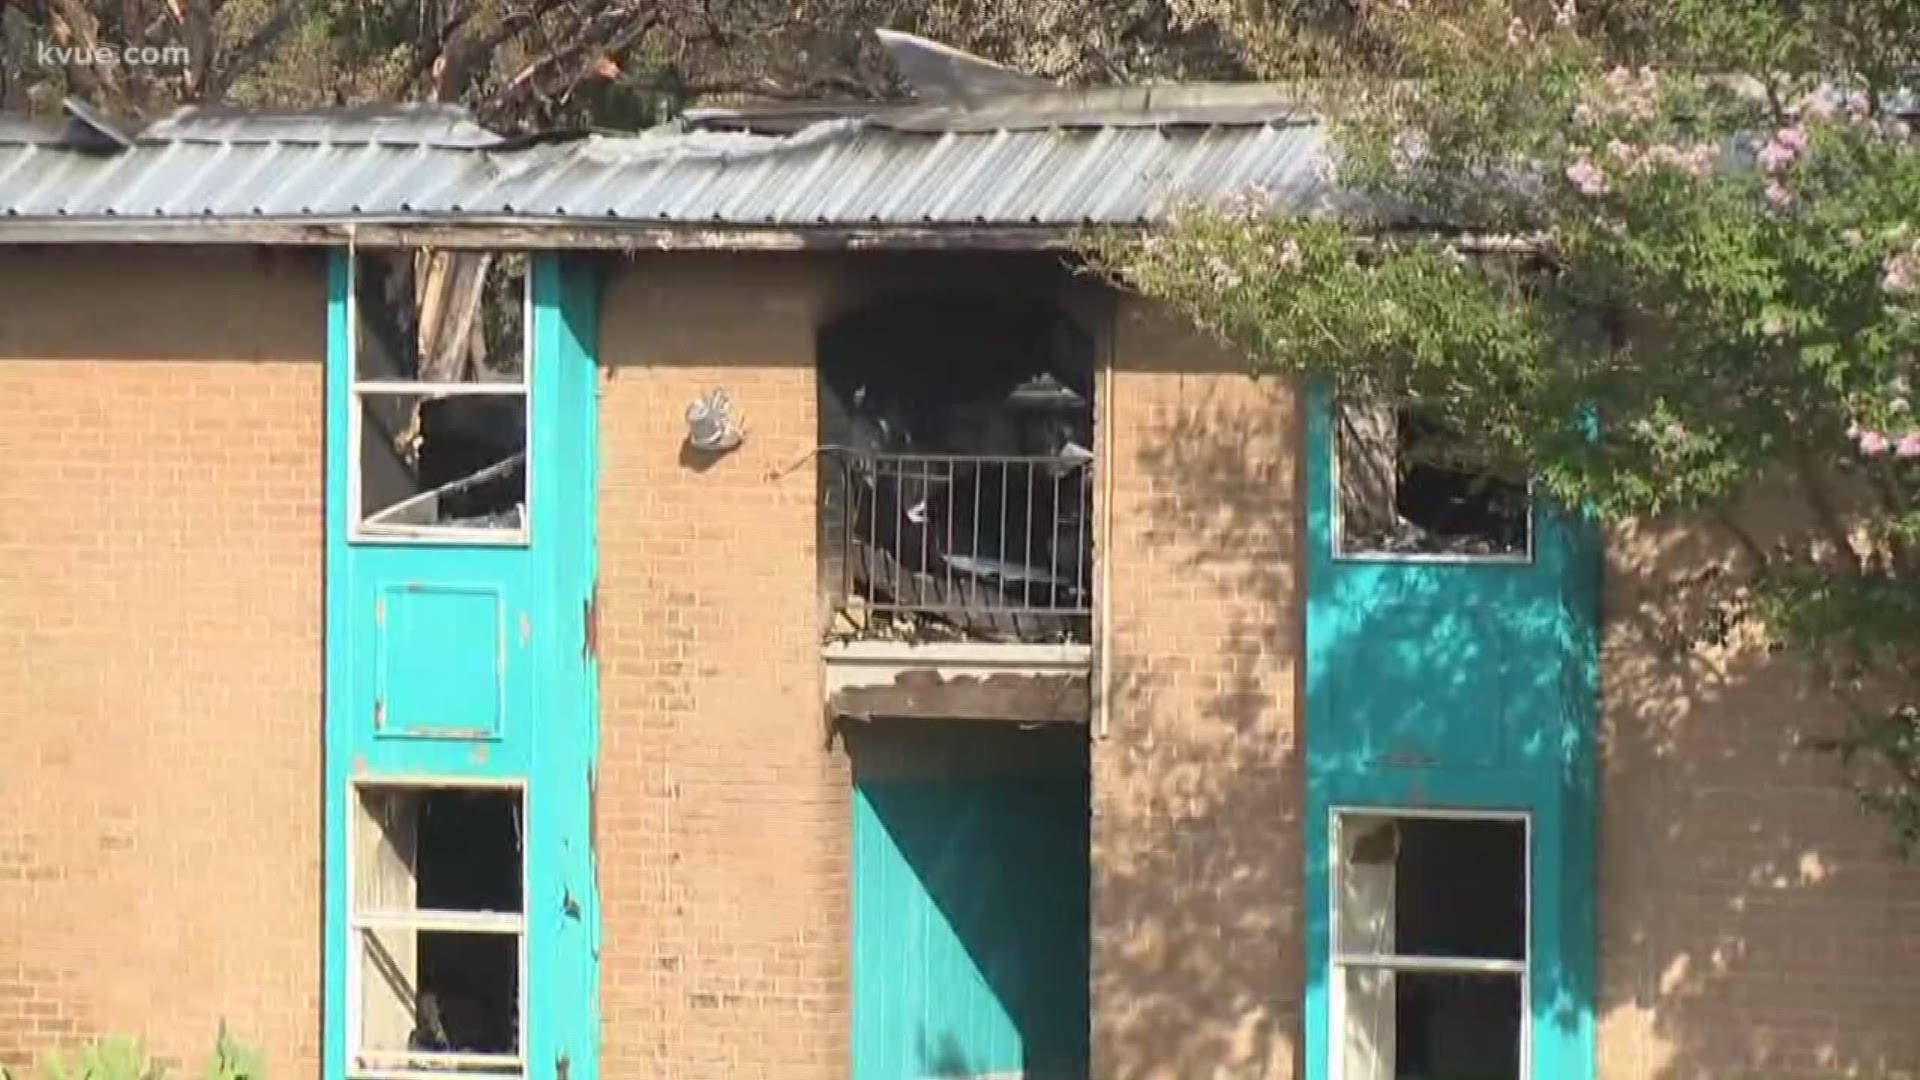 Two people are still missing after a San Marcos apartment fire.